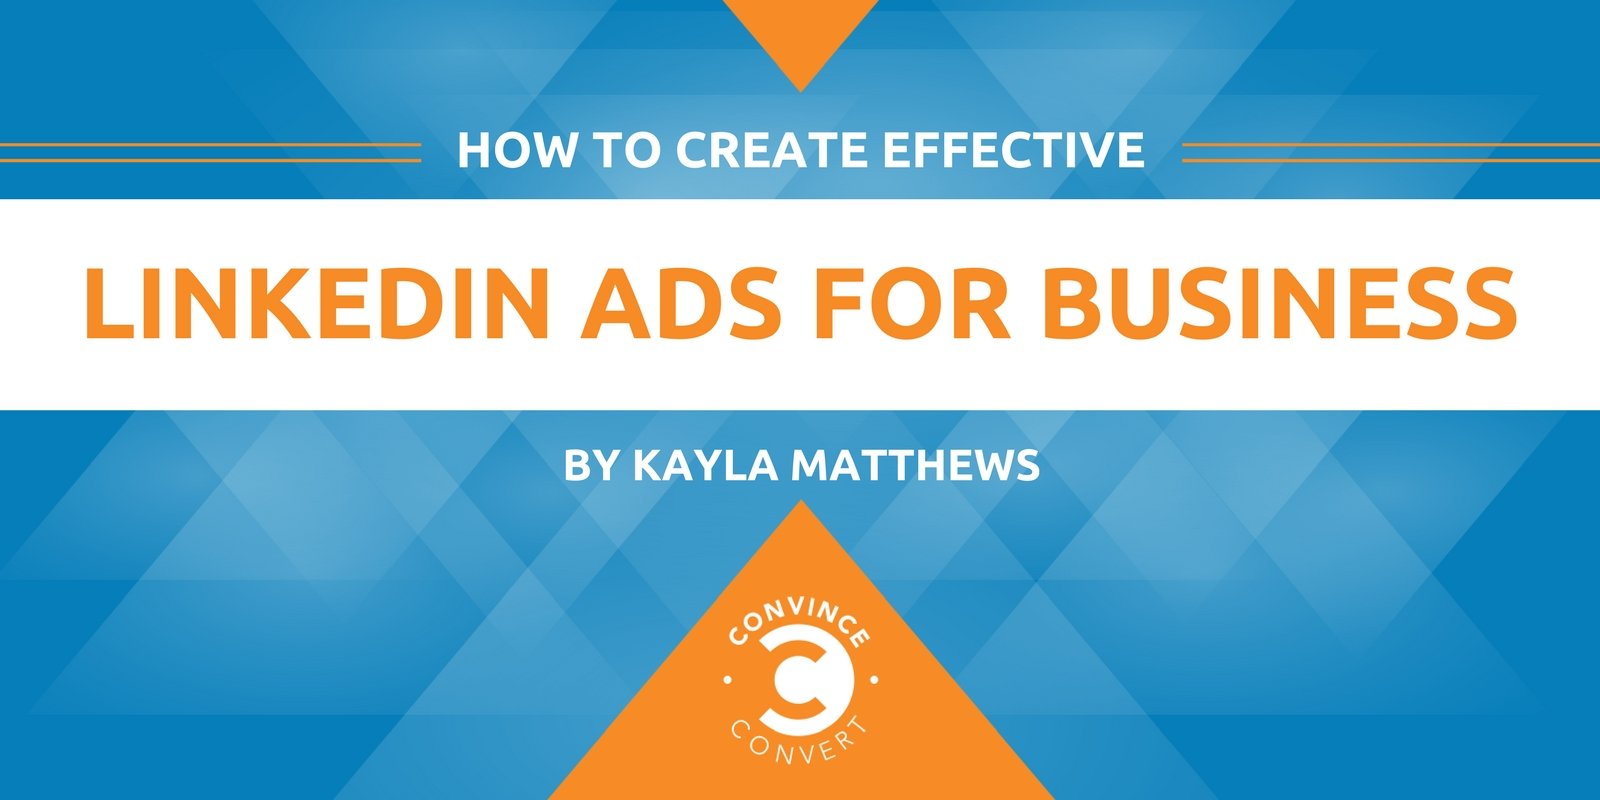 How to Create Effective LinkedIn Ads for Business